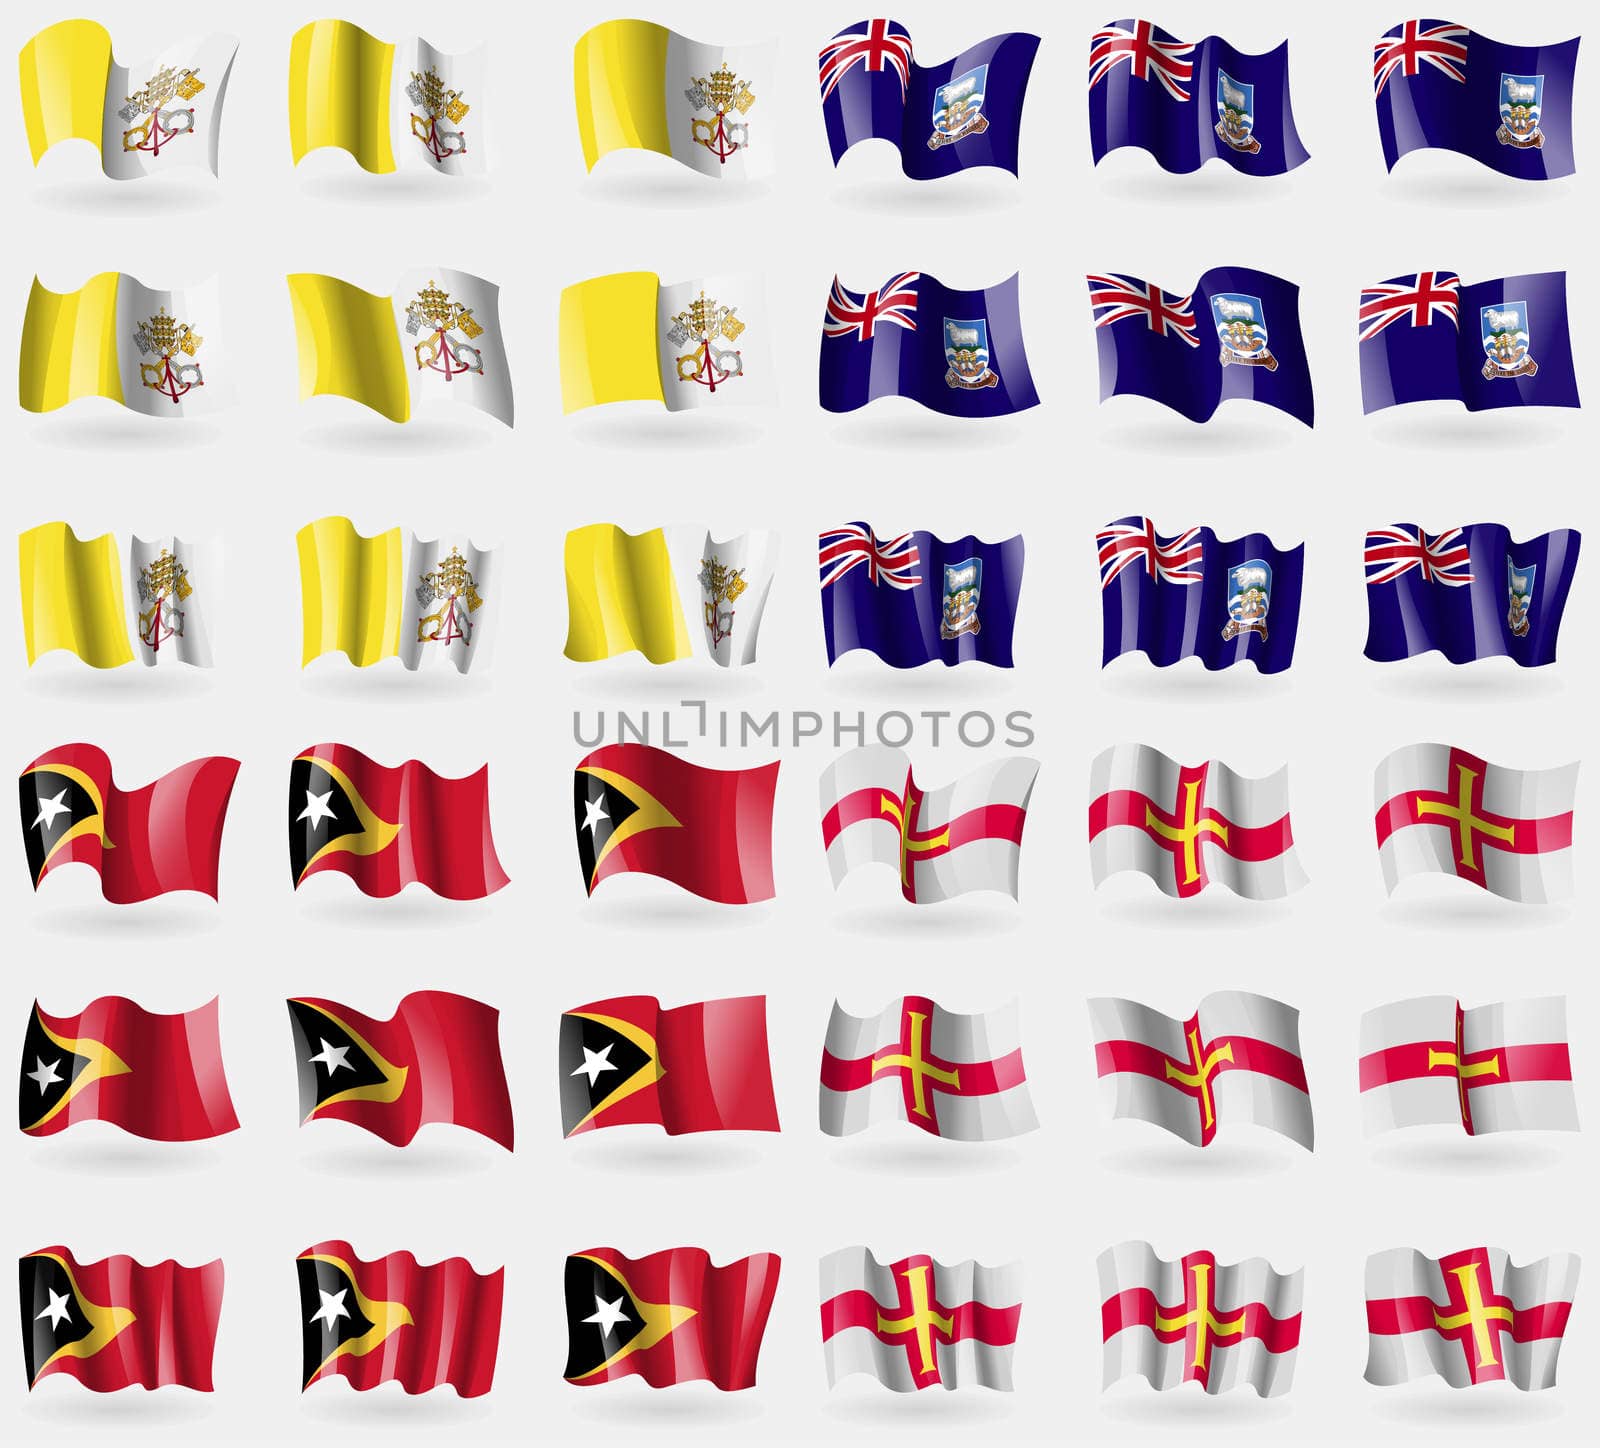 Vatican CityHoly See, Falkland Islands, East Timor, Guernsey. Set of 36 flags of the countries of the world. illustration